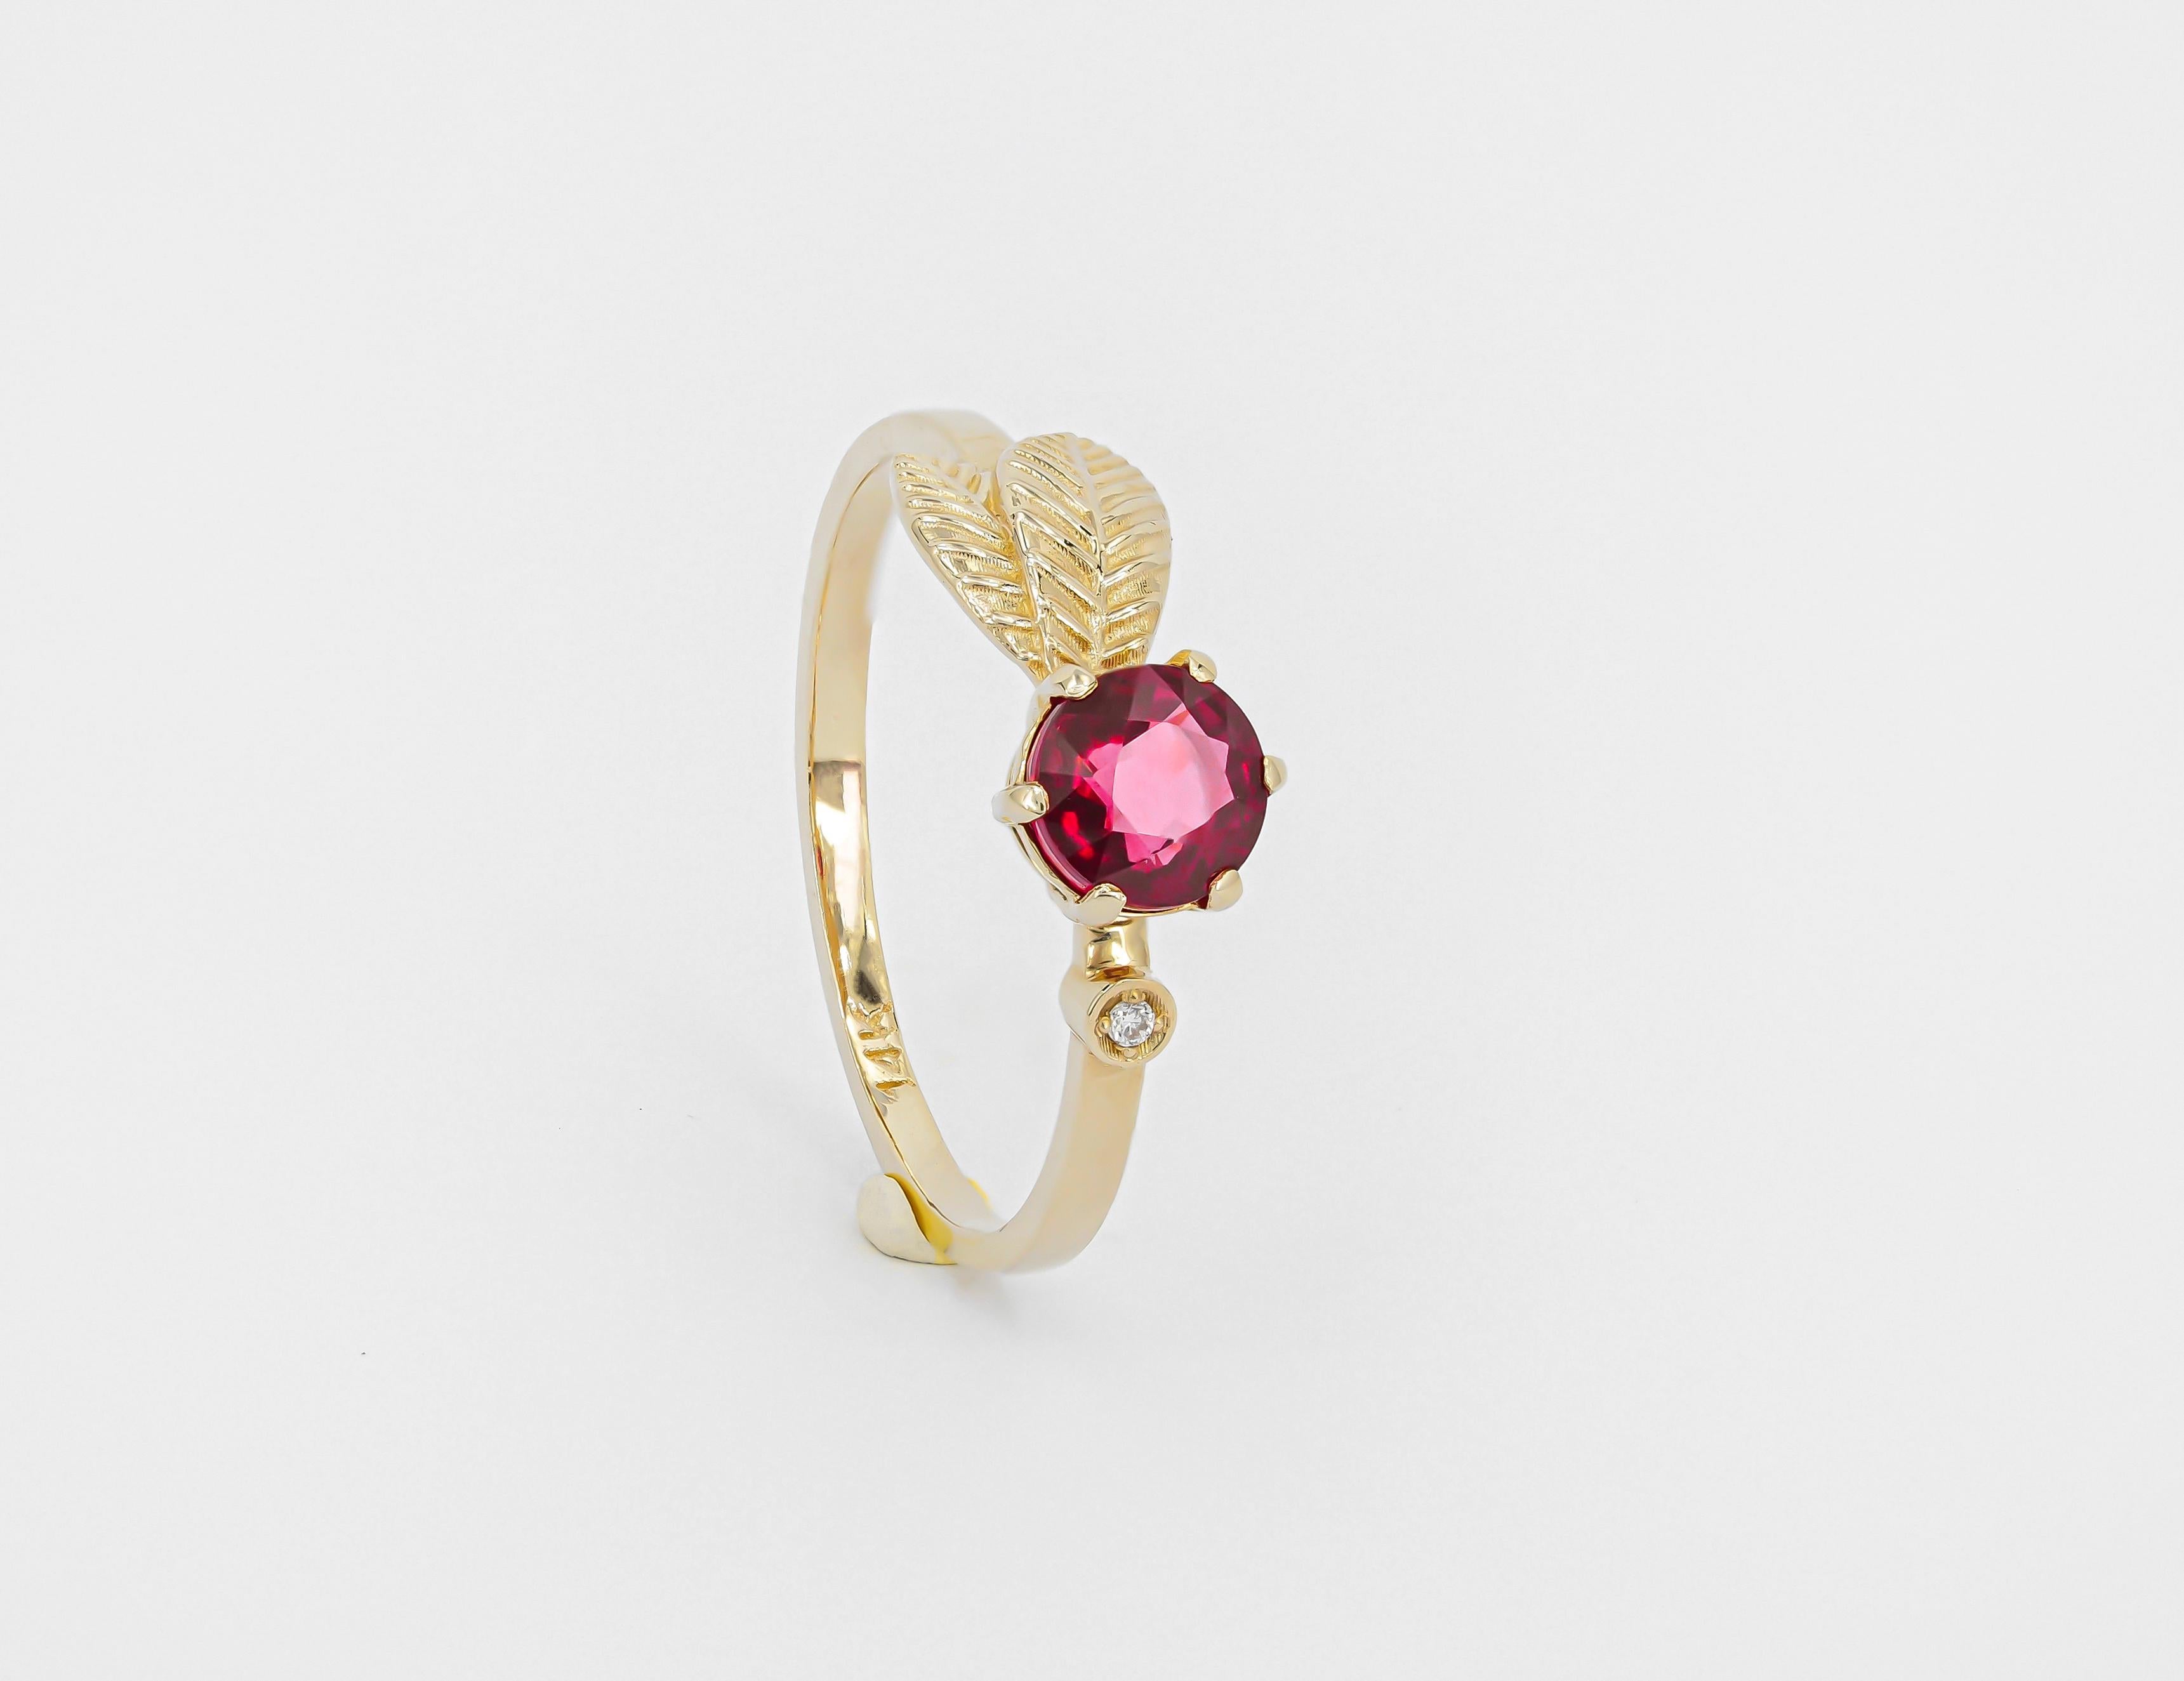 Garnet 14k gold Ring. 
Round Garnet Ring. January Birthstone Ring. Gold Berry Ring. Flower gold ring. Red garnet ring. Delicate garnet ring.

Metal: 14k gold
Weight: 1.70 g. depends from size.

Garnet: color - red - purplish red
Pear cut, 0.50 ct.